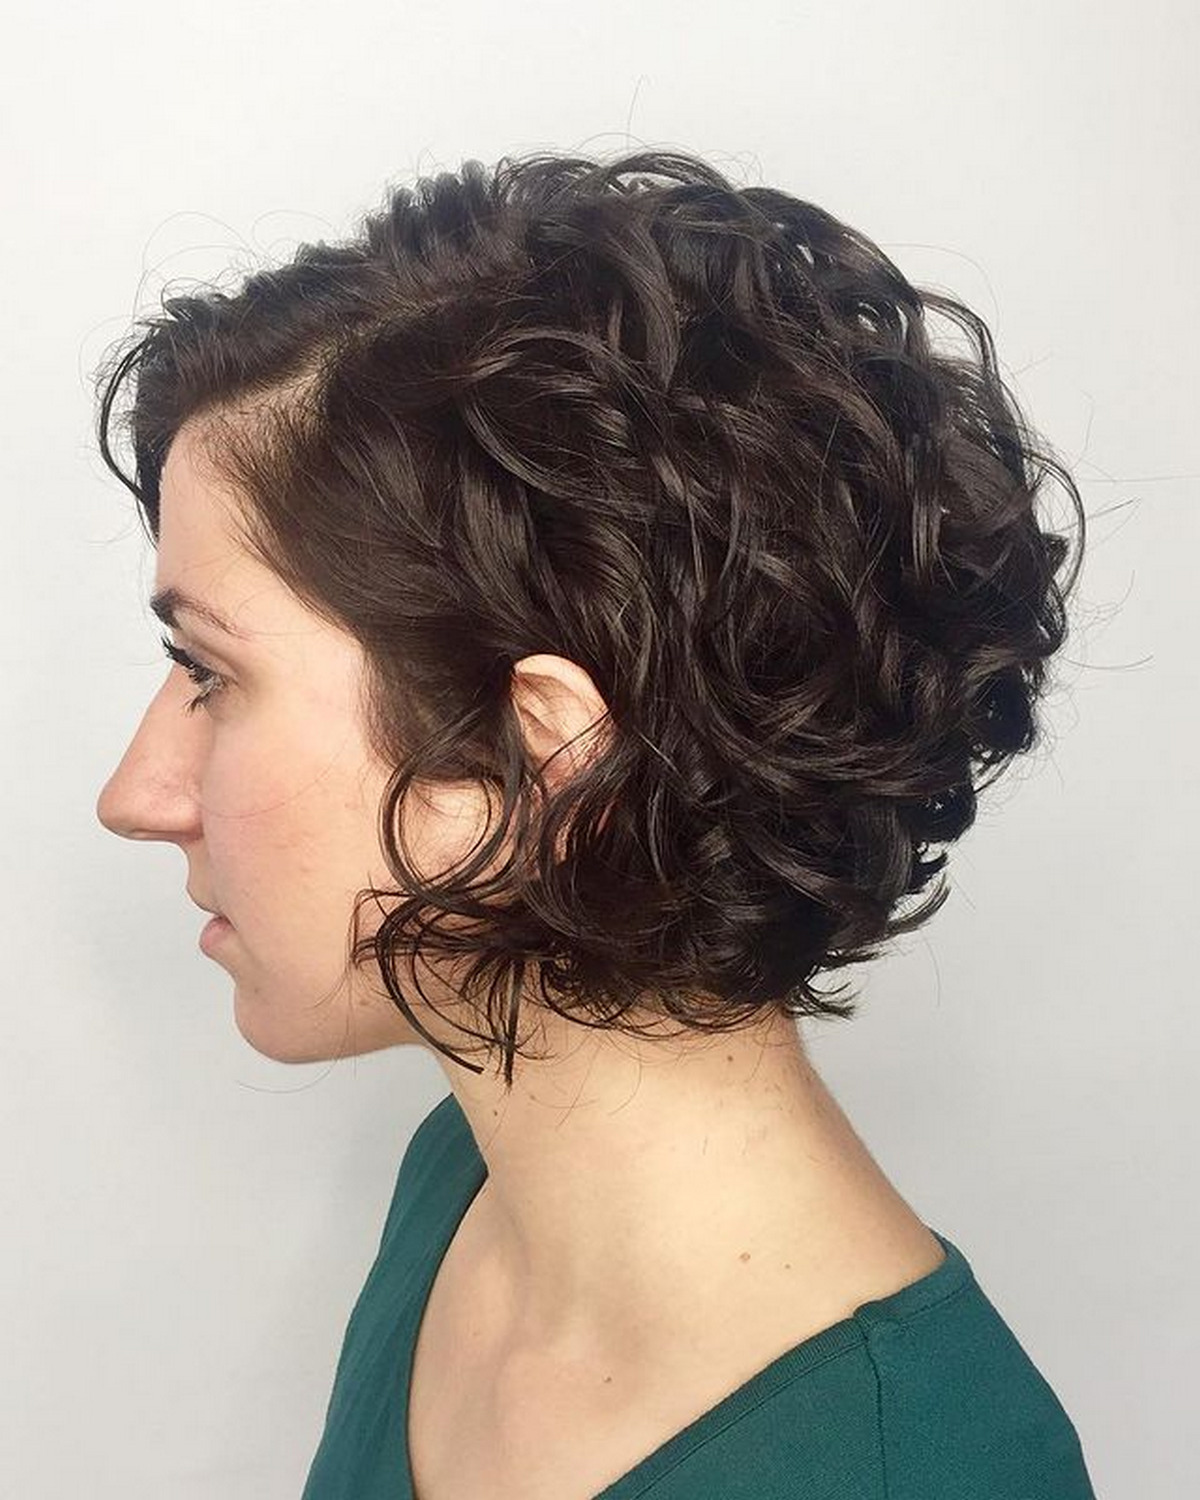 Jaw-Length Side-Parted Curly Bob